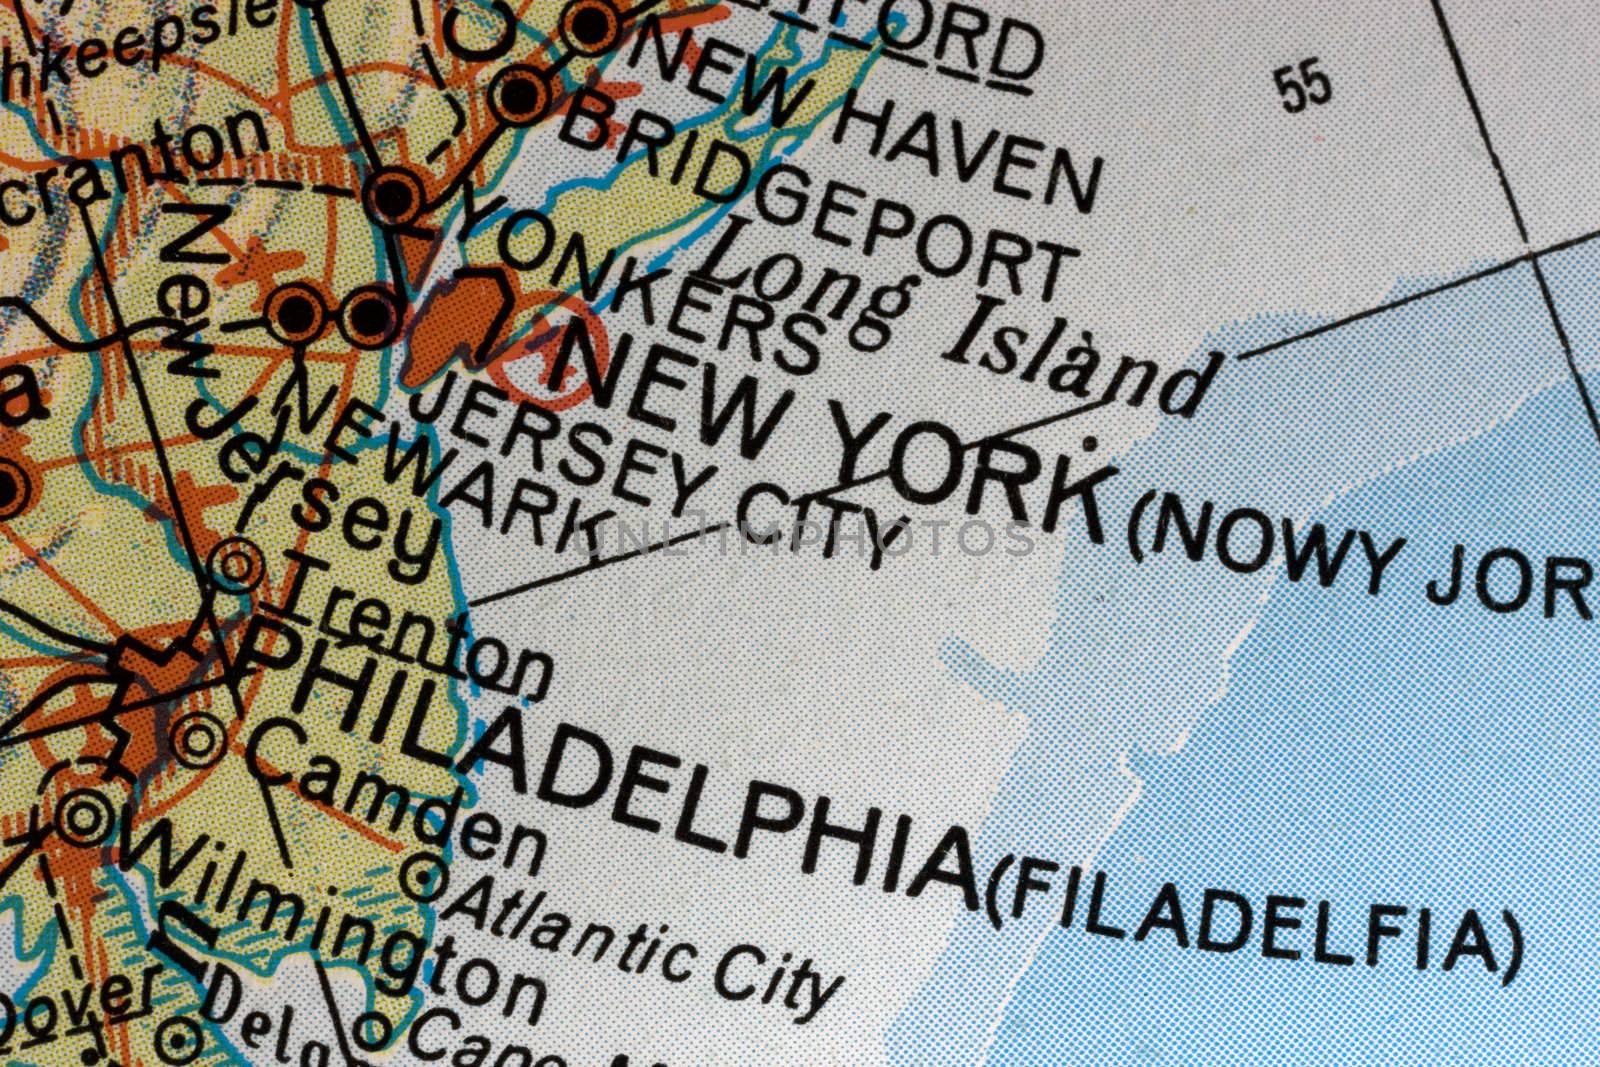 New York city in the map